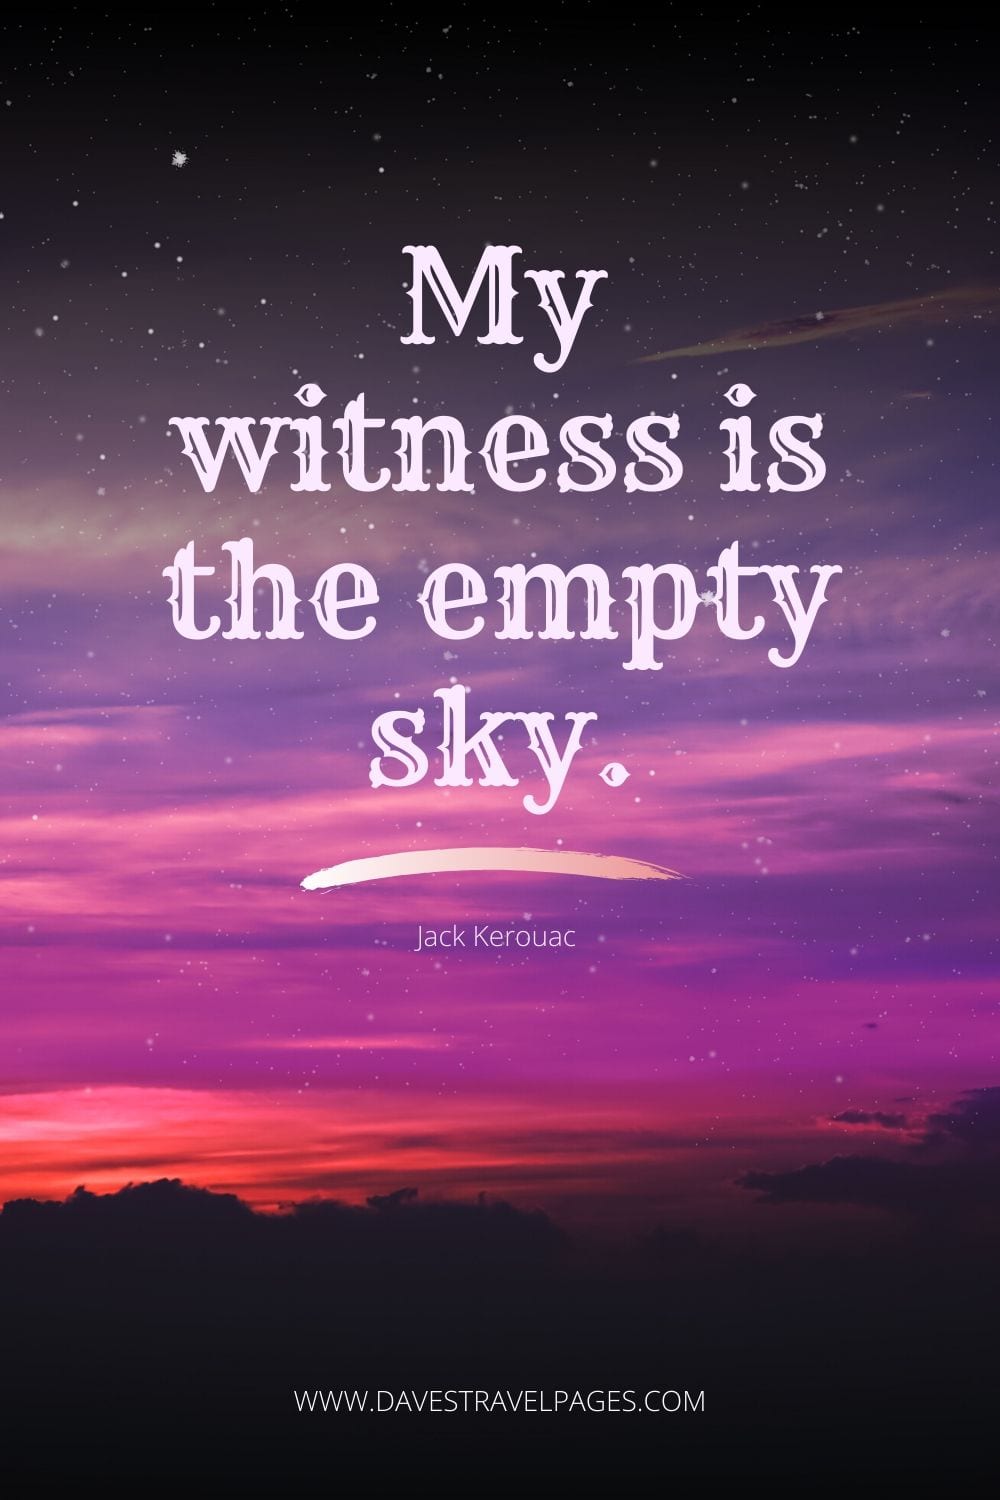 “My witness is the empty sky.” - Quote from Some of the Dharma by J. Kerouac